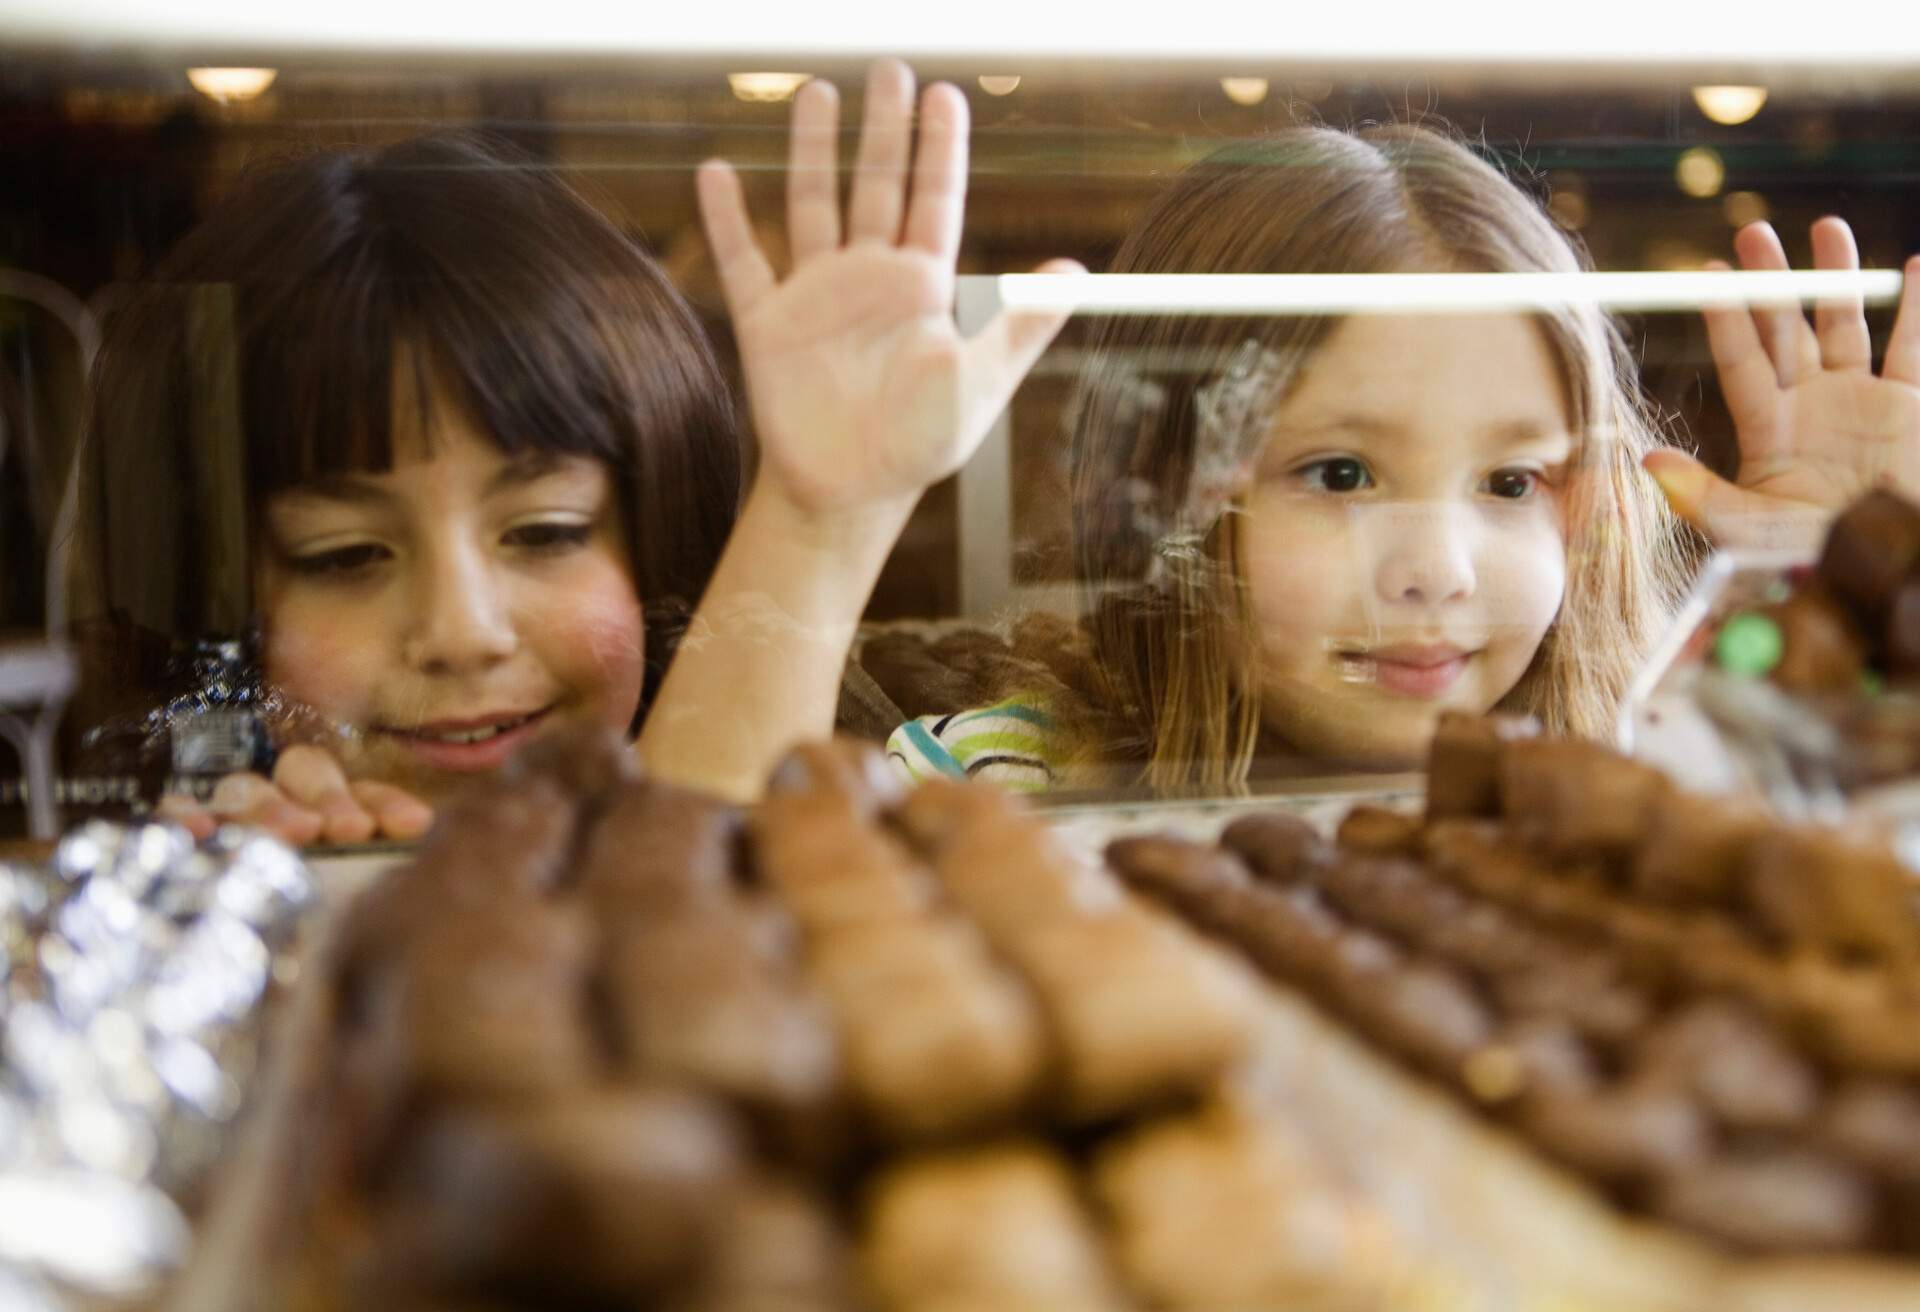 THEME_FOOD_CHOCOLATE_CHILDREN_GIRLS_GettyImages-85646291